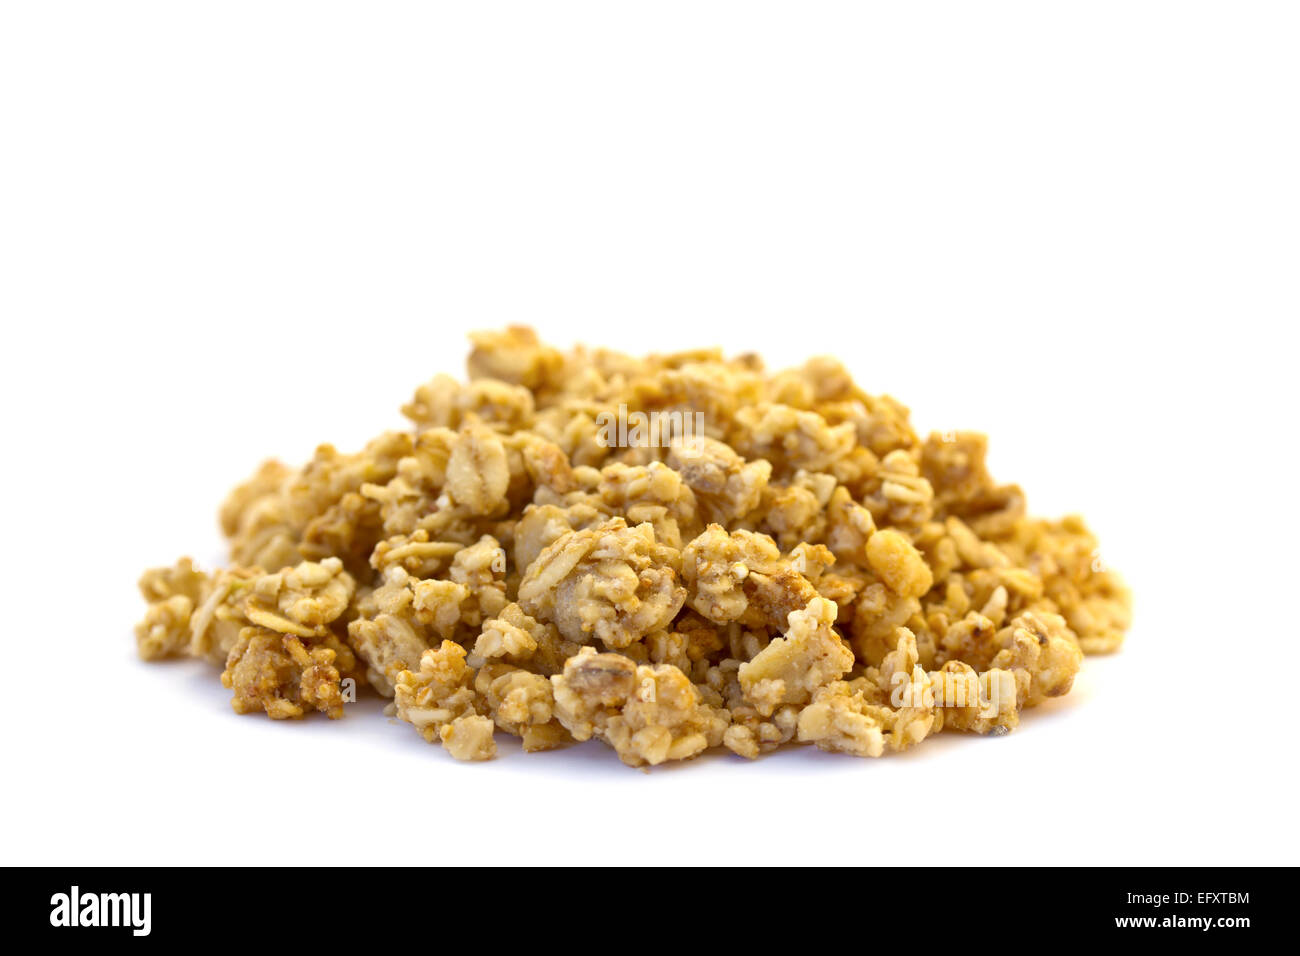 Amaranth cereals / mueslis on white background. Often used with milk and berries. Stock Photo